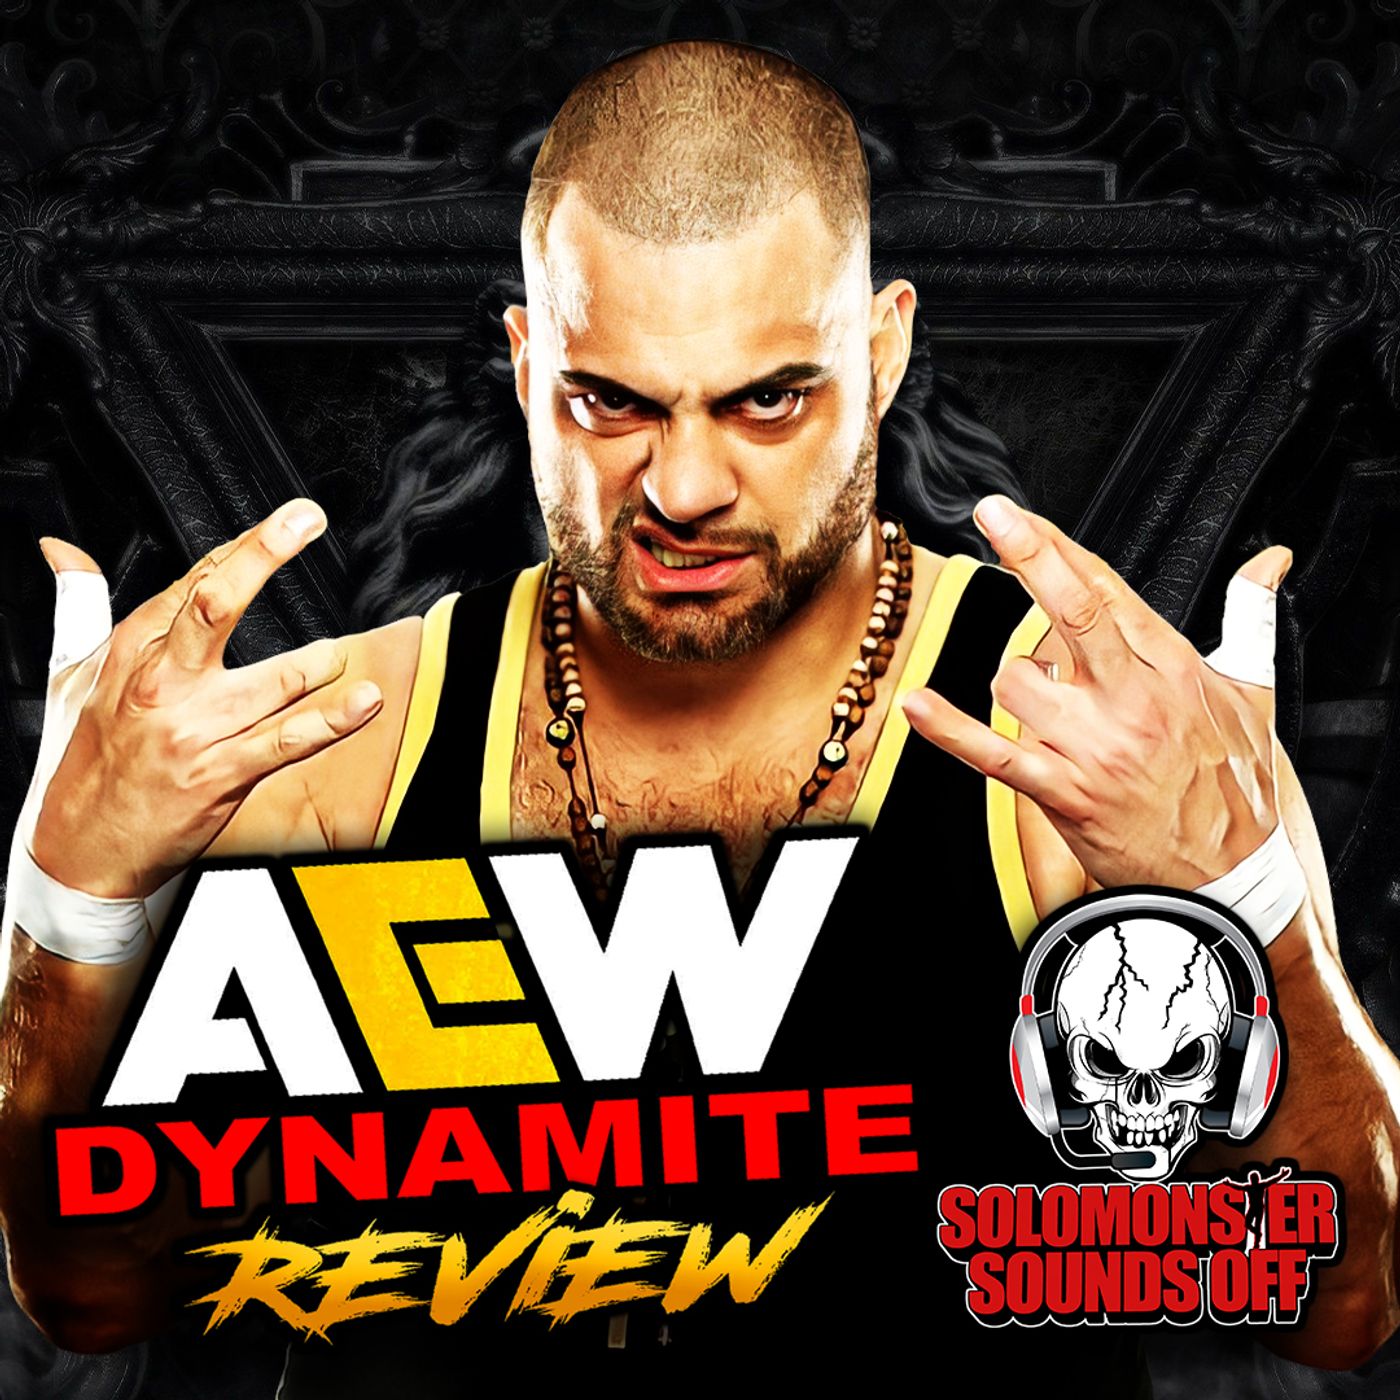 AEW Dynamite 12/27/23 Review - SAMOA JOE MAKES A DEAL WITH THE DEVIL BEFORE WORLD’S END